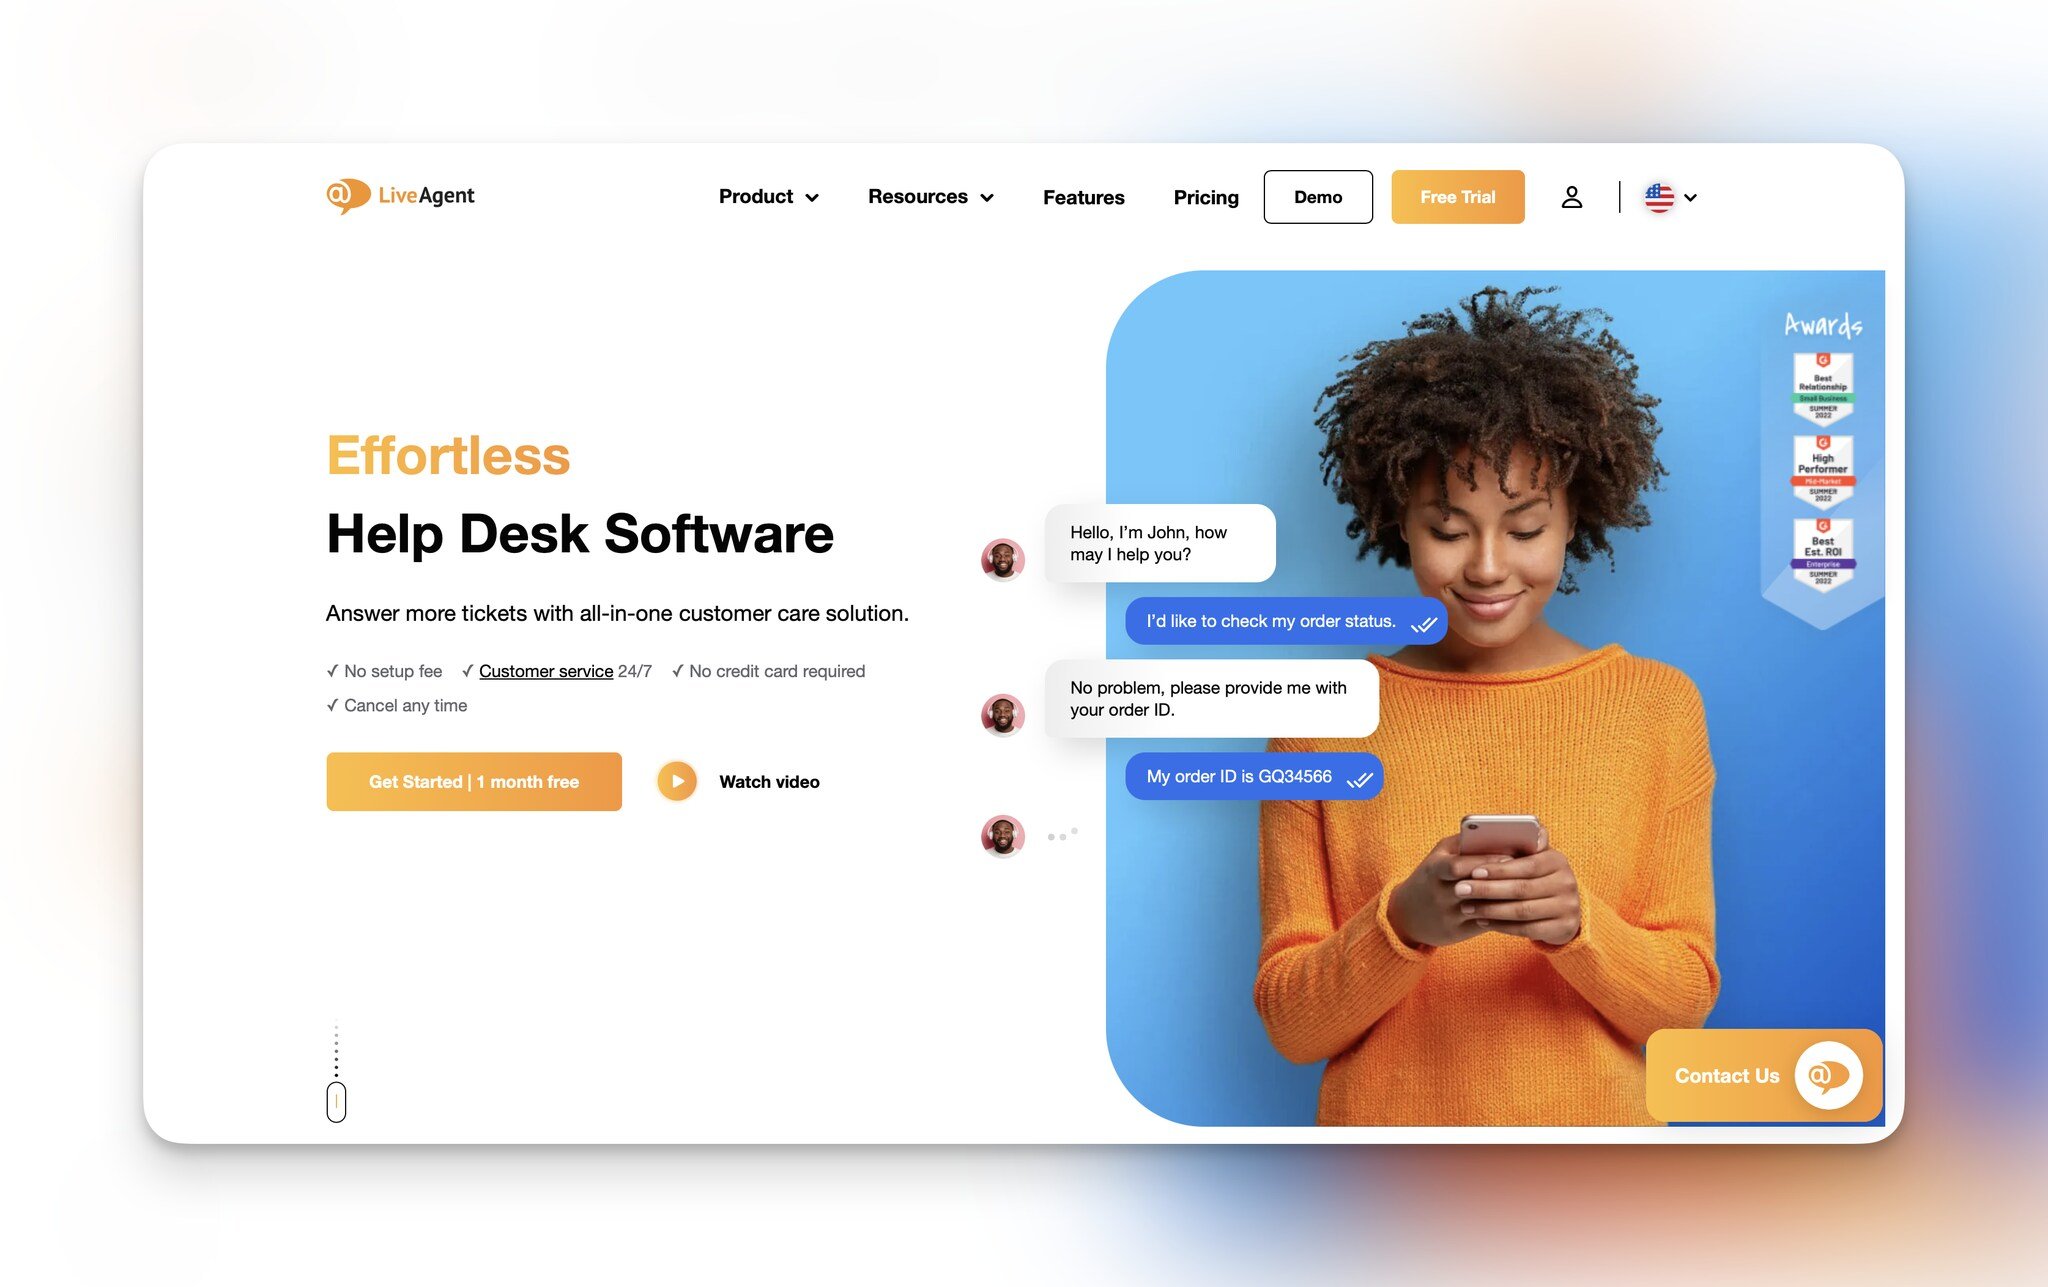 LiveAgent's homepage with the headline "Effortless Help Desk Software" followed by "Get started- 1 month free" button and on the right, there is a female looking at her phone and chat bubbles on the image